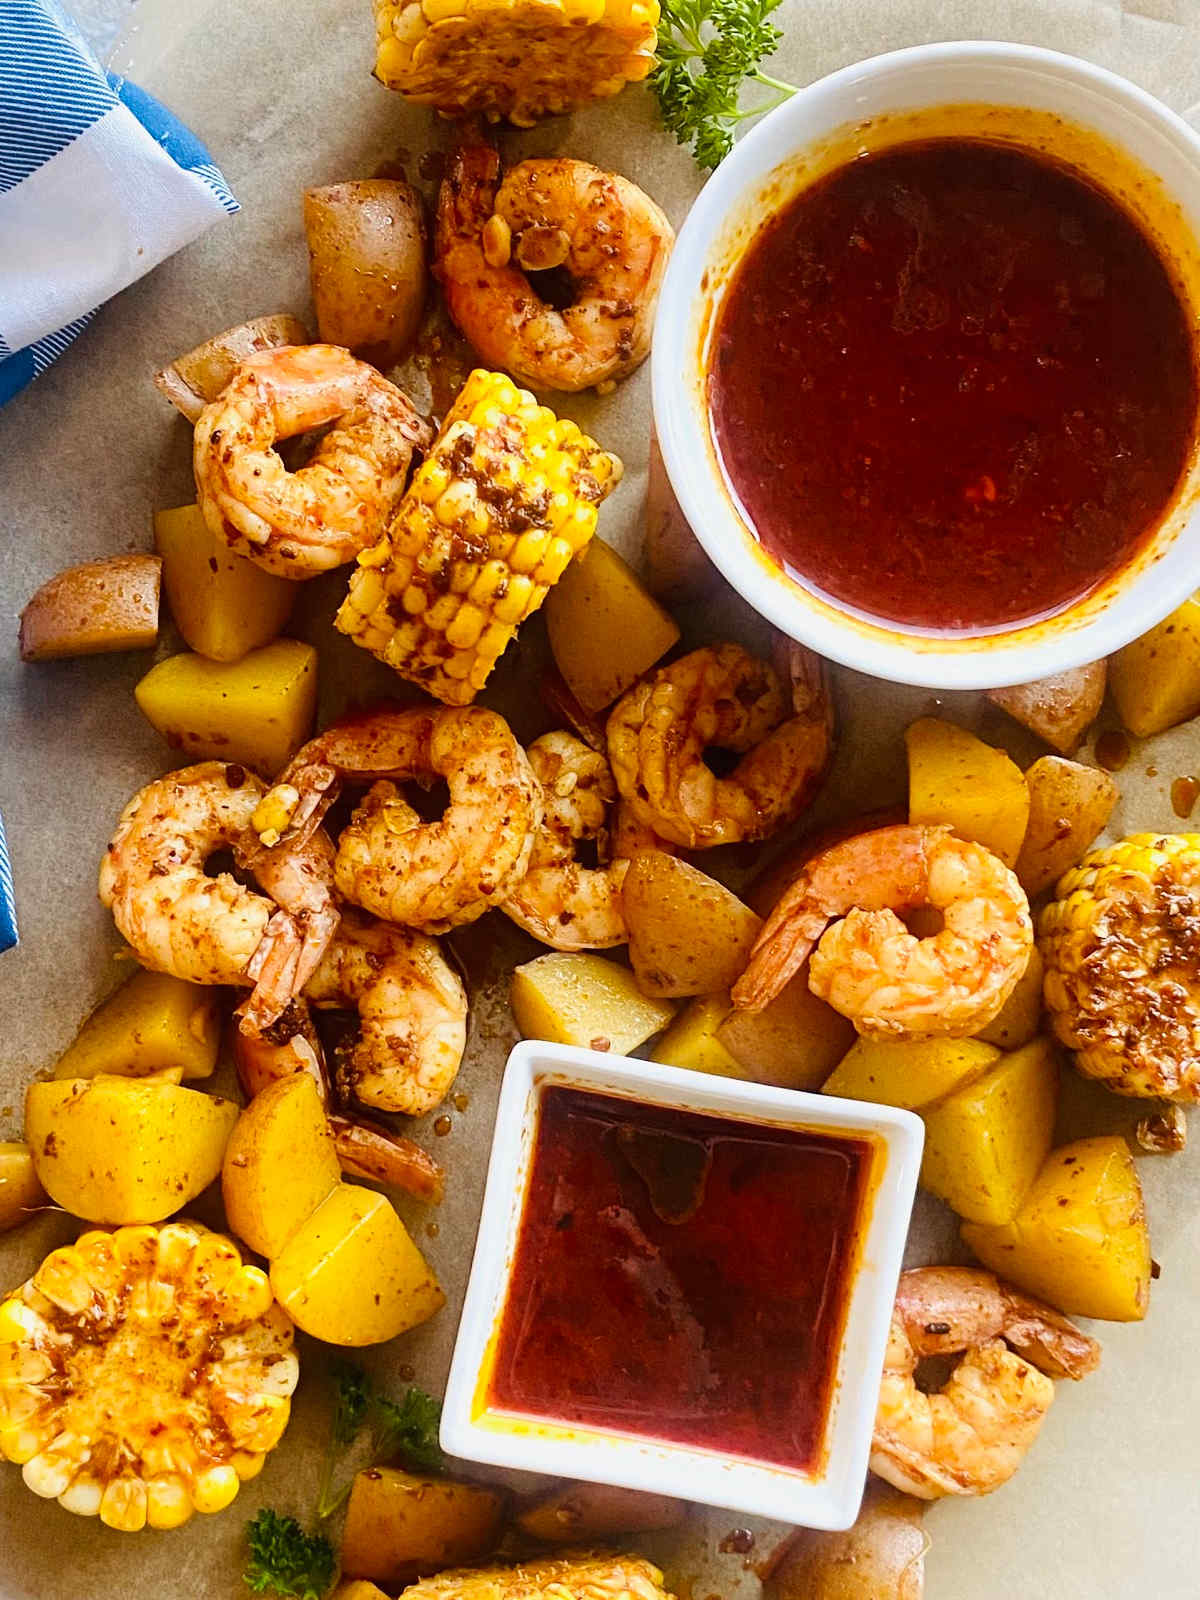 seafood boil sauce in a dish surrounded by shrimp, corn and potatoes in the seafood boil sauce.